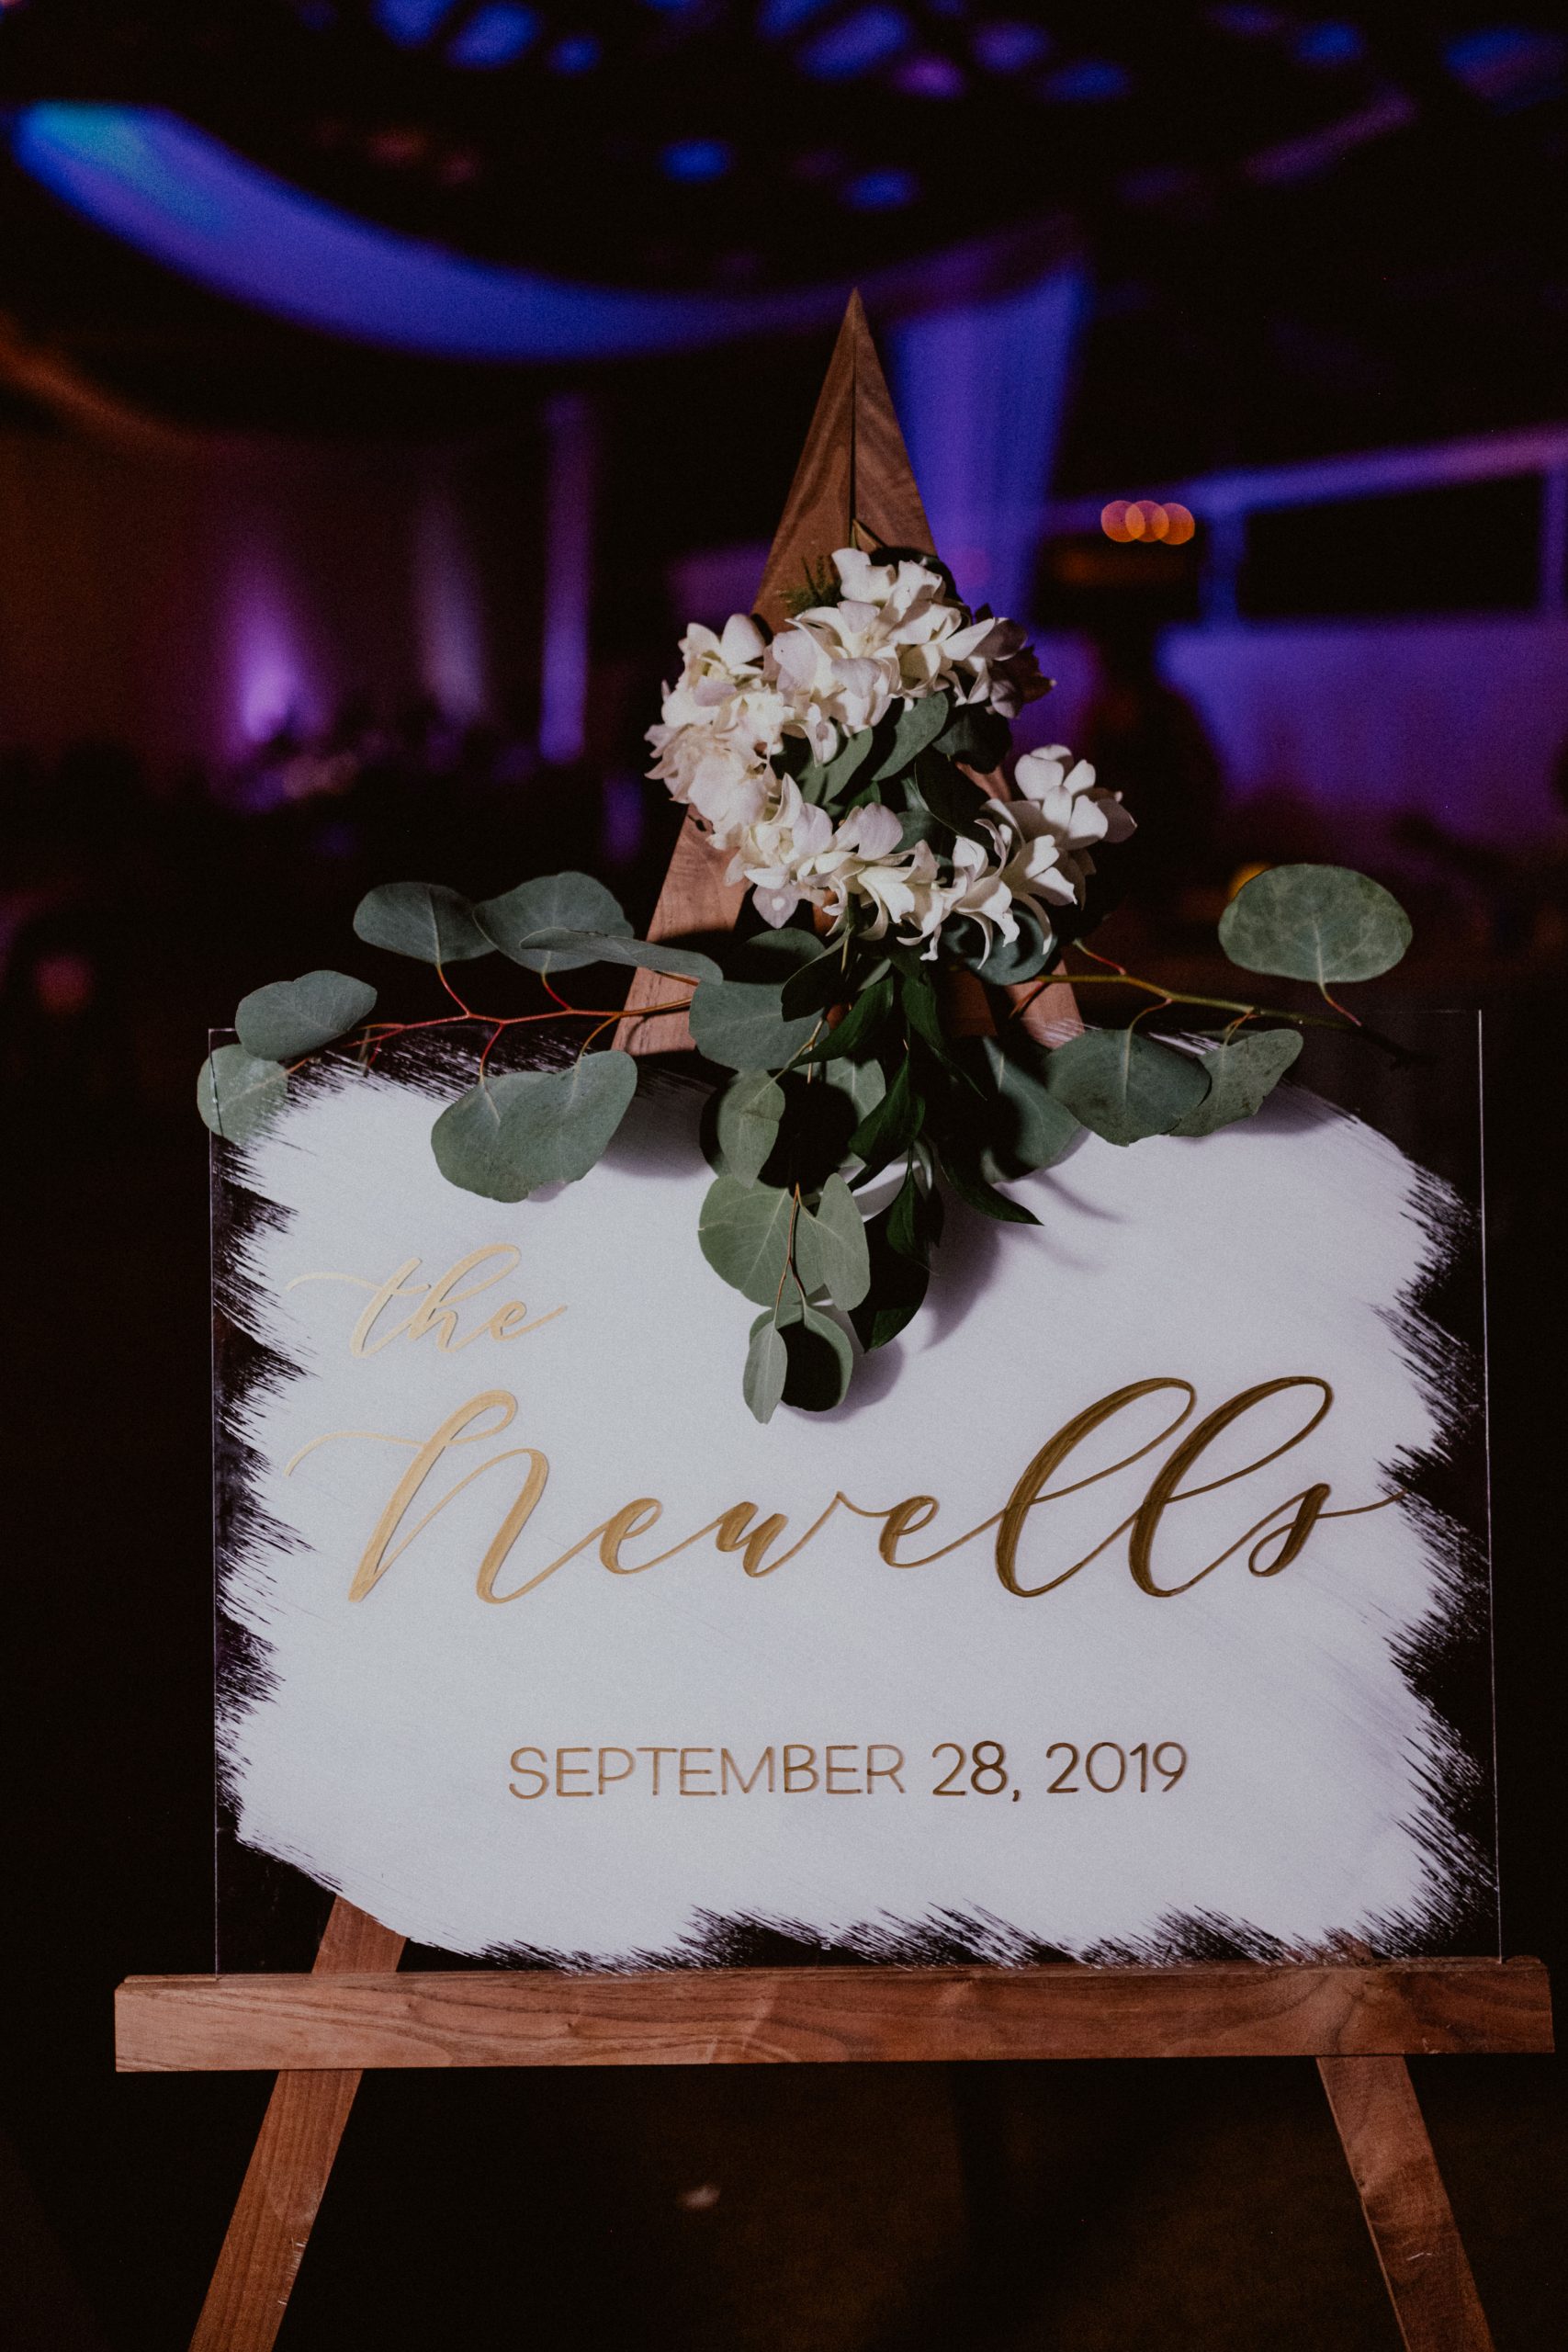 Moody wedding decor inspiration for newlywed name plate and accessories | Oahu Wedding Photographer, Oahu Elopement Photographer, Destination Wedding Photographer, Destination Elopement Photographer, Newlywed moments ideas, Newlywed Photography inspiration, Hawaii Elopement ideas | chelseaabril.com